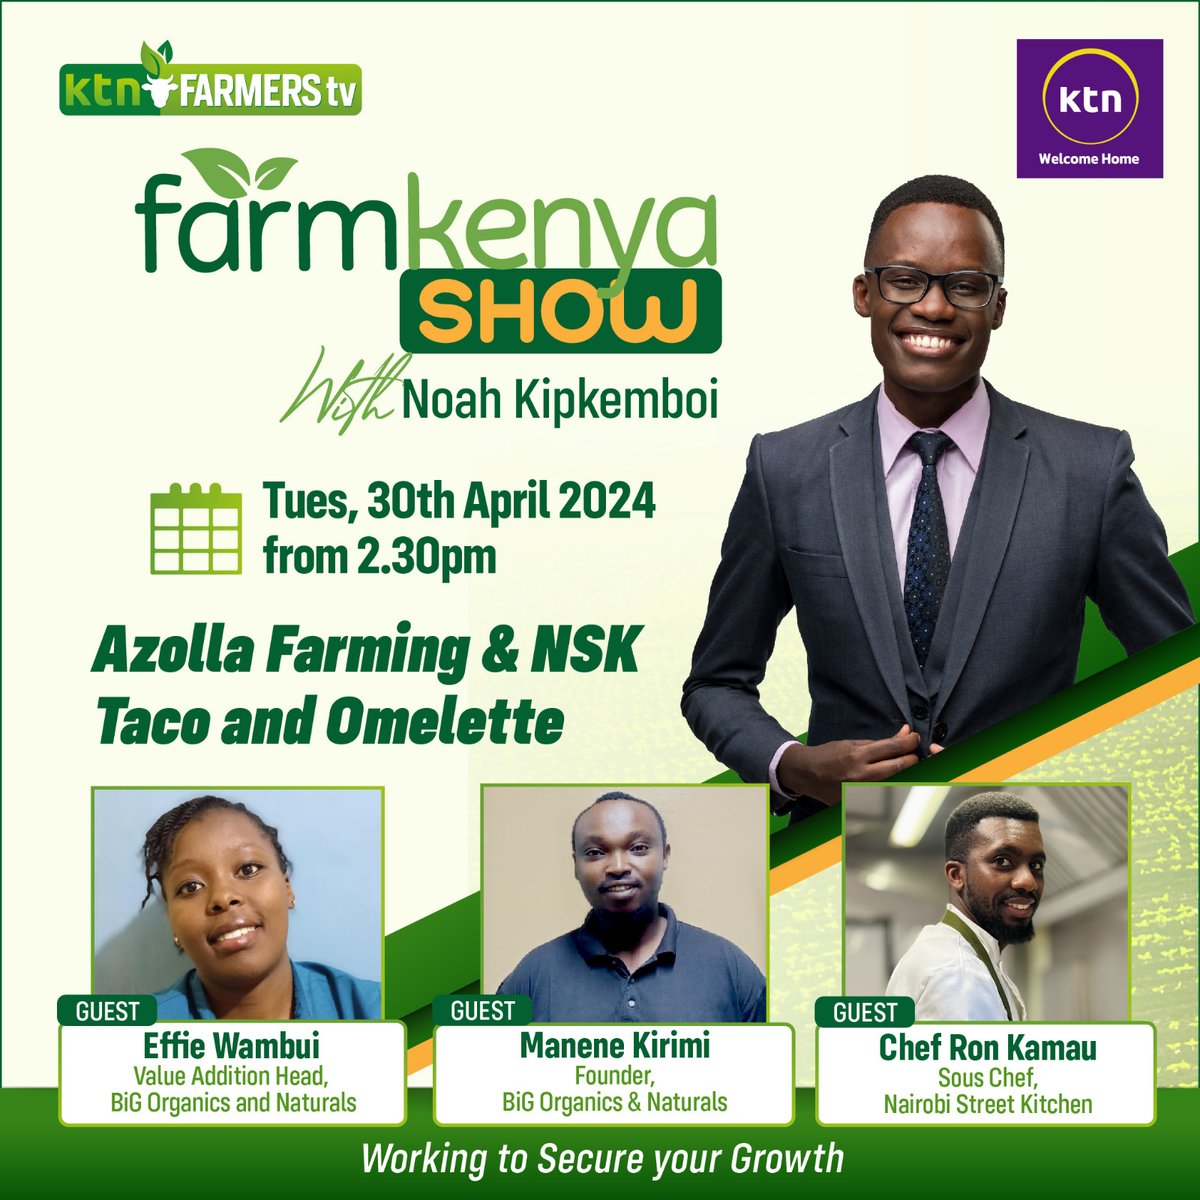 Join us on the Farm Kenya Show for an exciting discussion on Azolla Farming and NSK Taco and Omelette! 🌱🍳 Featuring: Effie Wambui, Value Addition Head at BiG Organics and Naturals, Manene Kirimi, Founder of BiG Organics and Naturals, and Chef Ron Kamau, Sous Chef at…